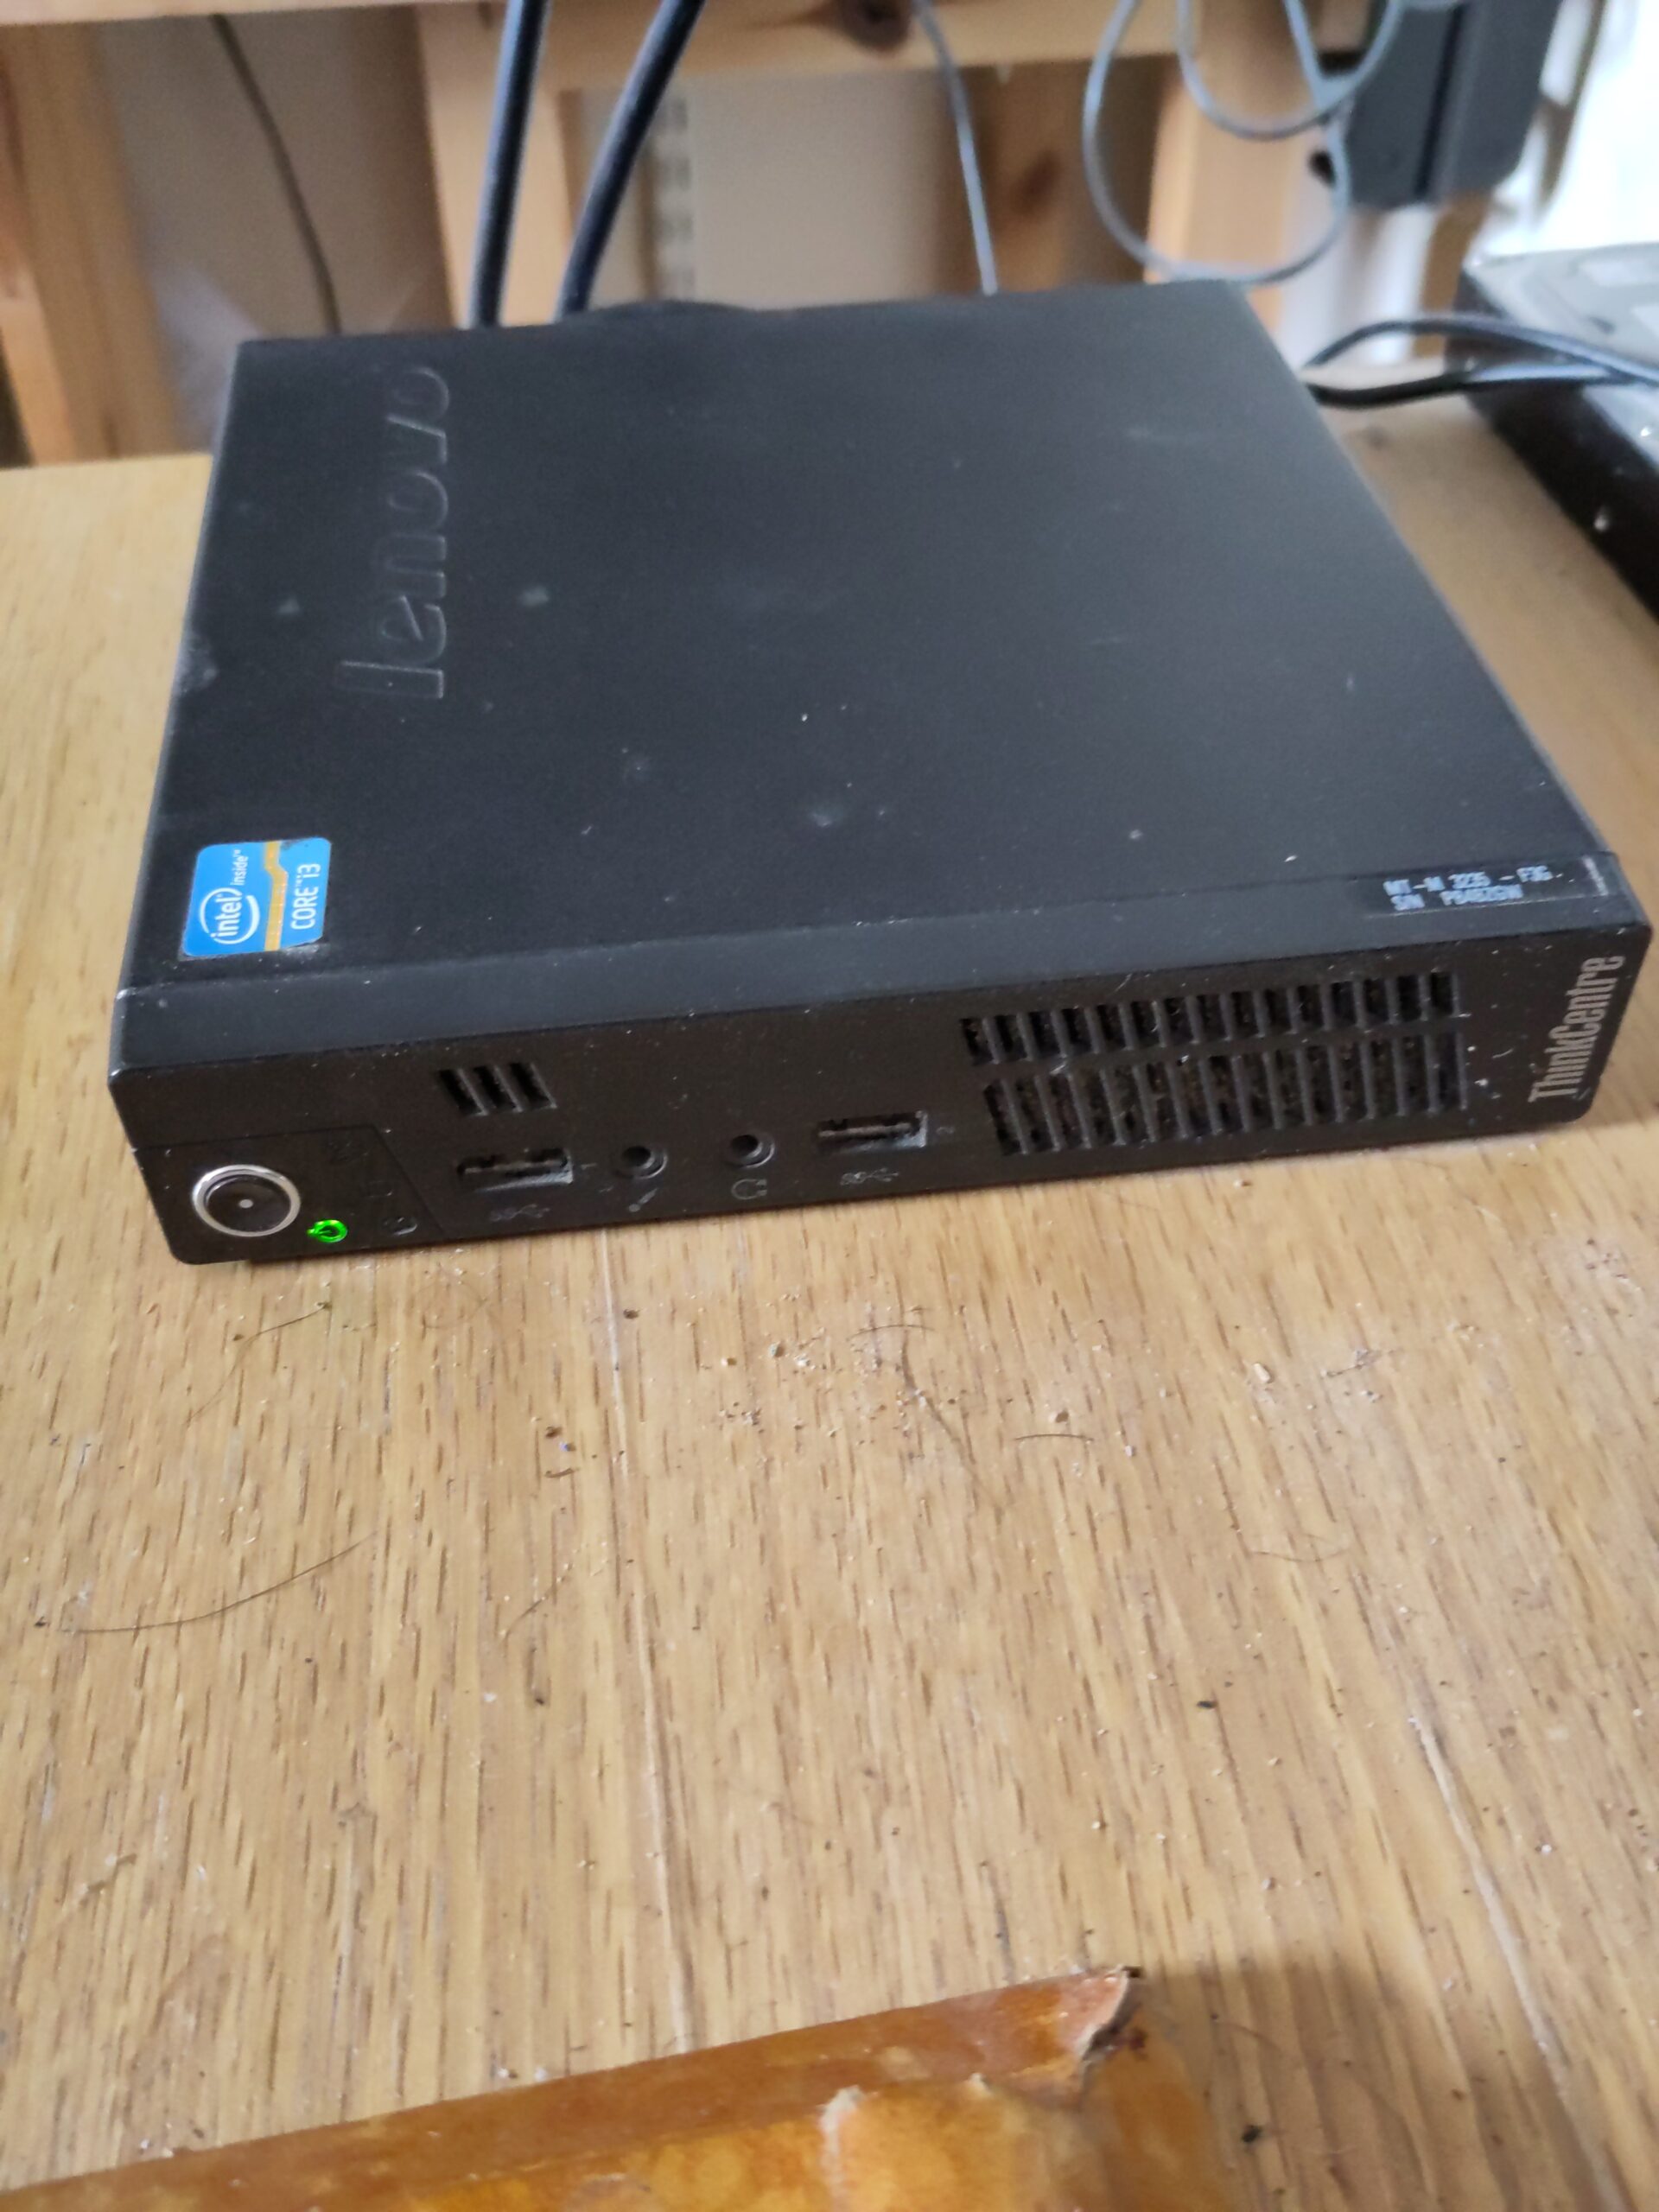 A small desktop computer, labelled "ThinkCentre Tiny".